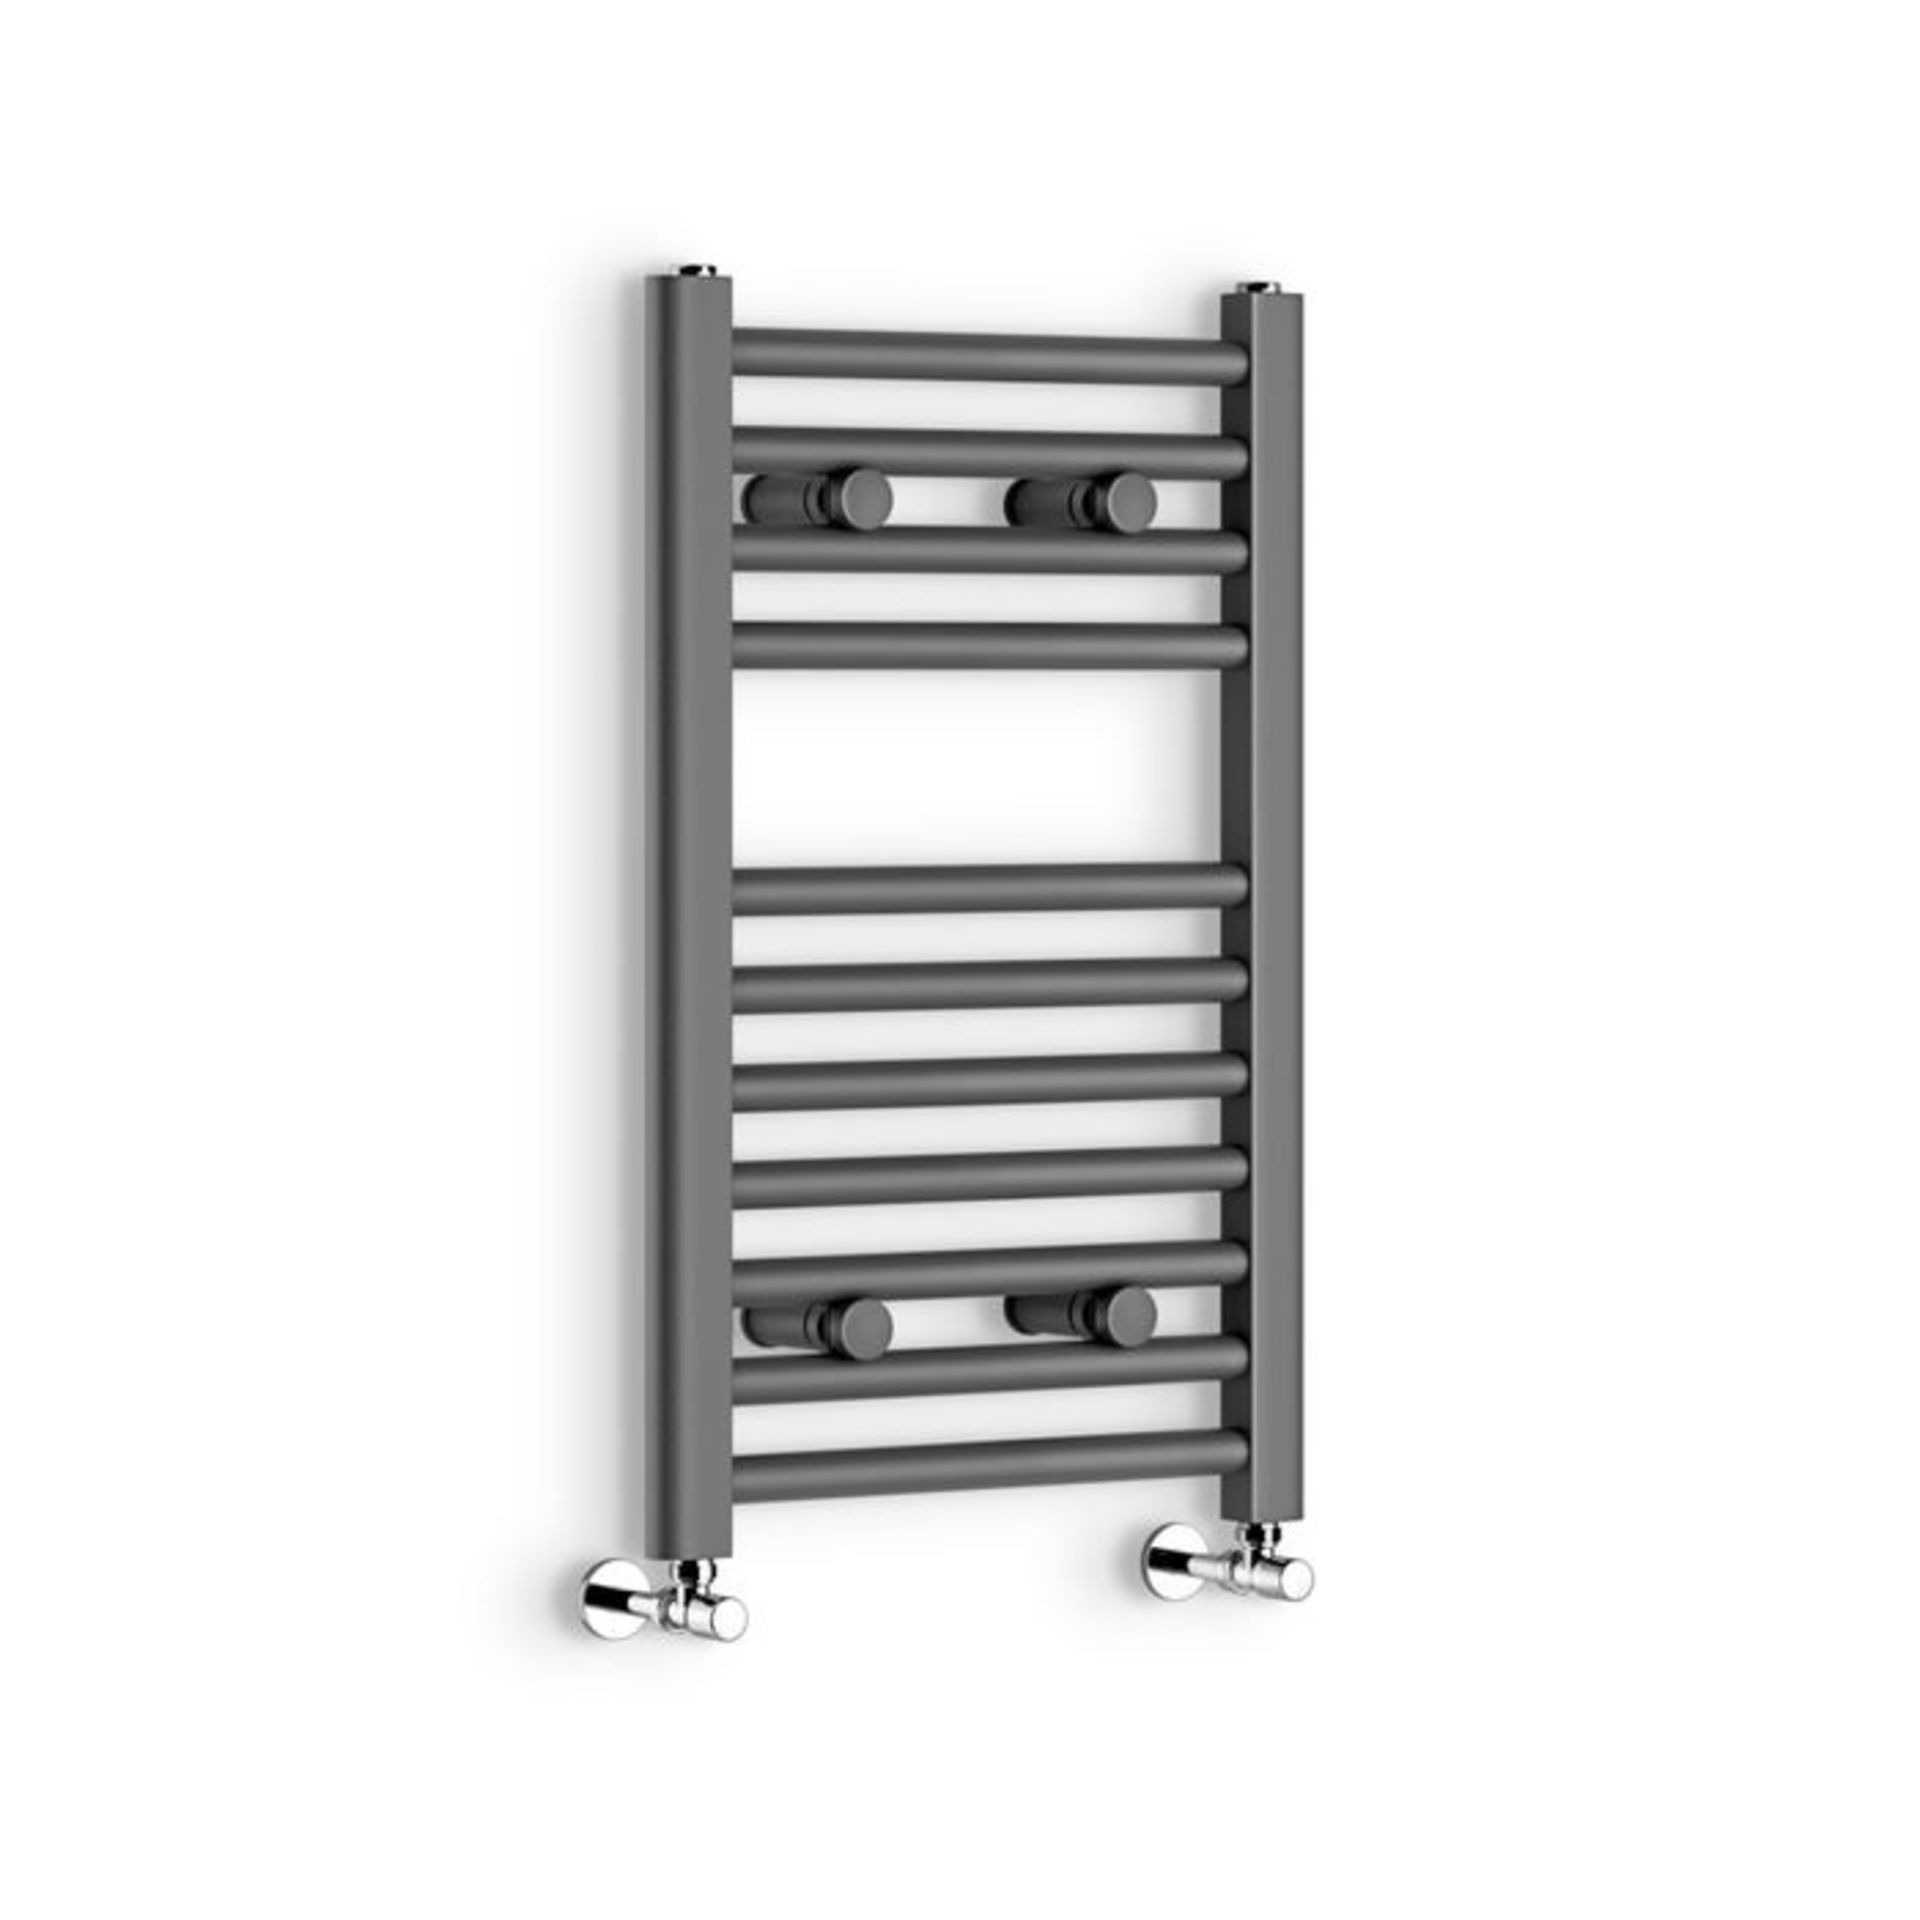 (L155) 650x400mm - 25mm Tubes - Anthracite Heated Straight Rail Ladder Towel Radiator. RRP £124. - Image 2 of 3